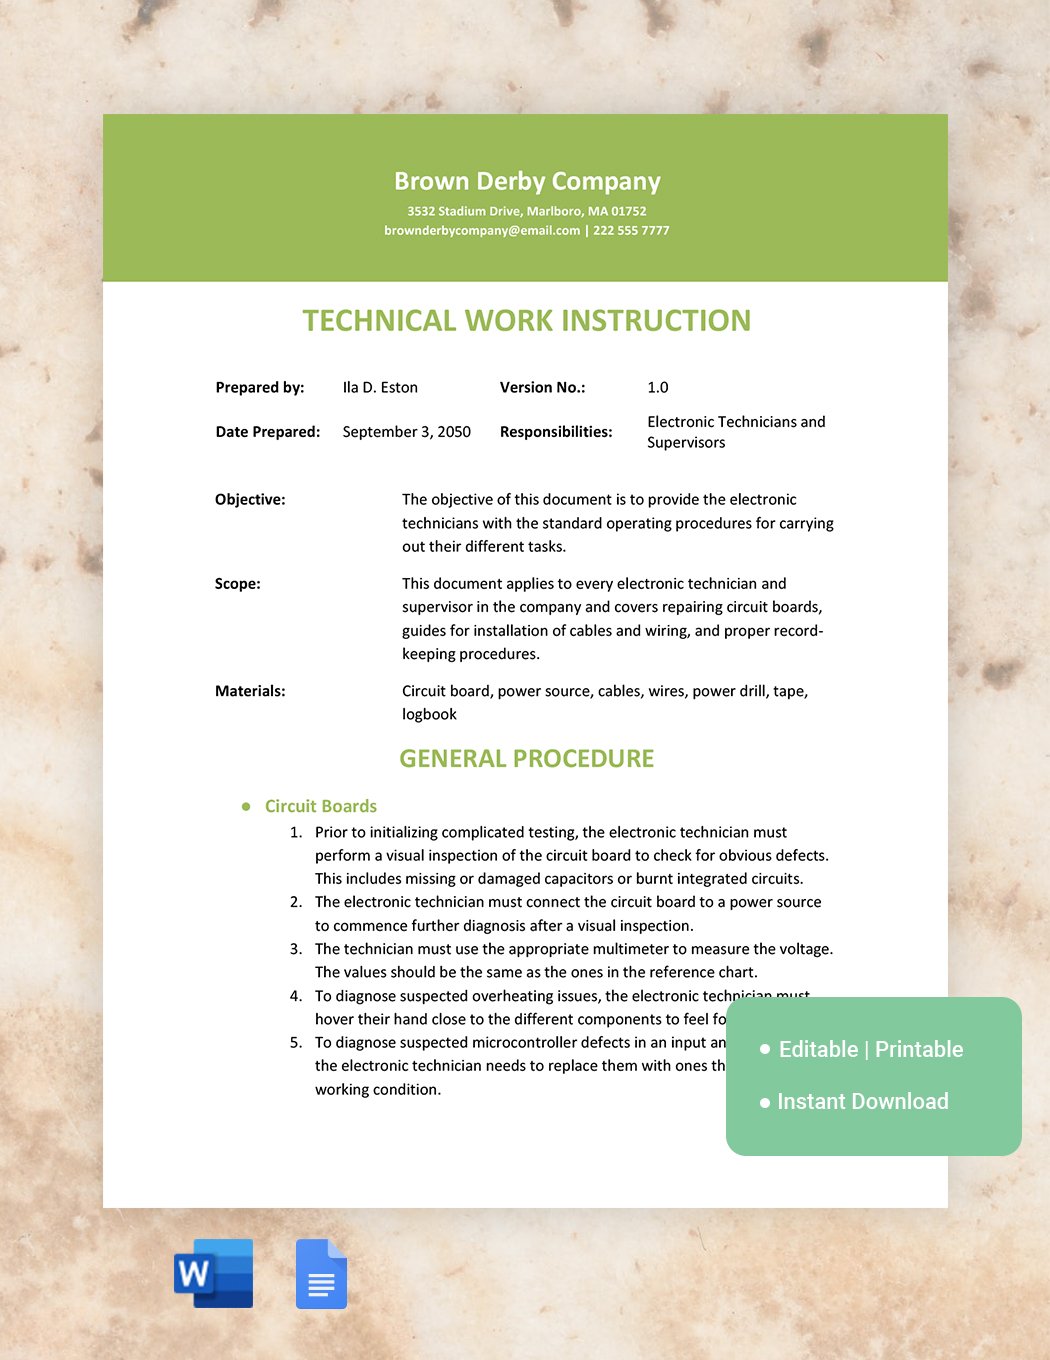 ISO 9001 Work Instruction Template Download in Word, Google Docs